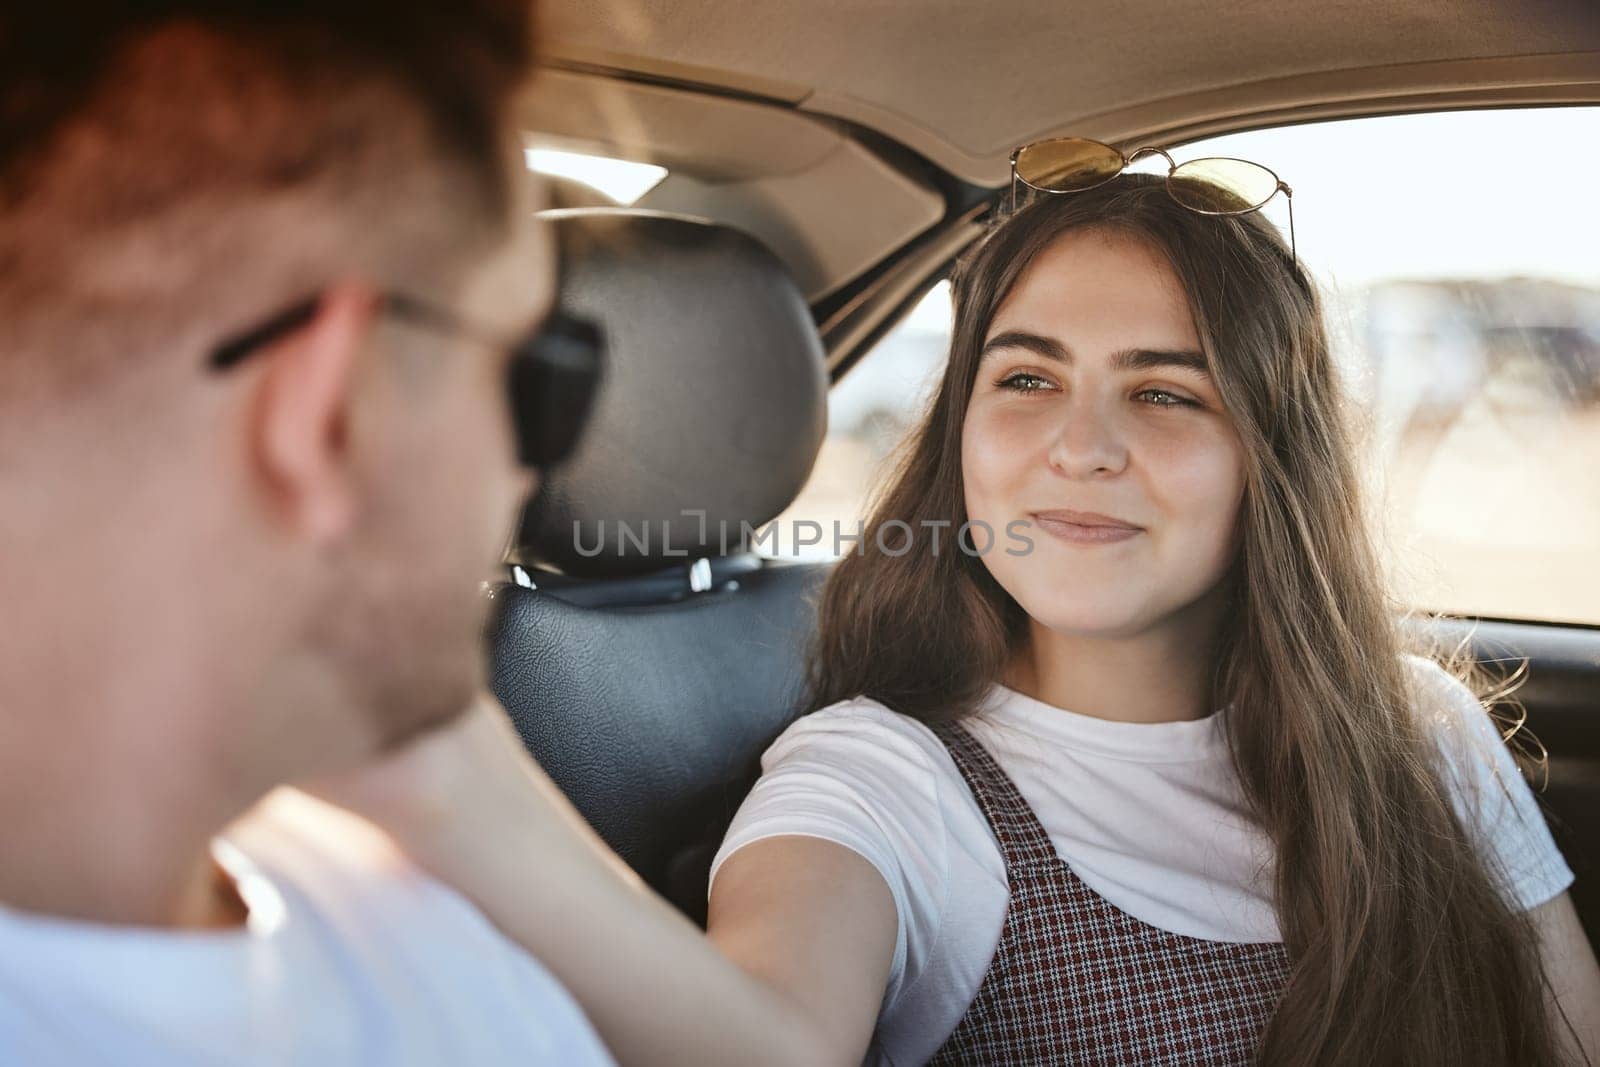 Love, care and couple on car road trip for fun travel adventure, bonding and enjoy romantic quality time together. Peace, wellness and freedom for young gen z man and woman in motor transportation by YuriArcurs